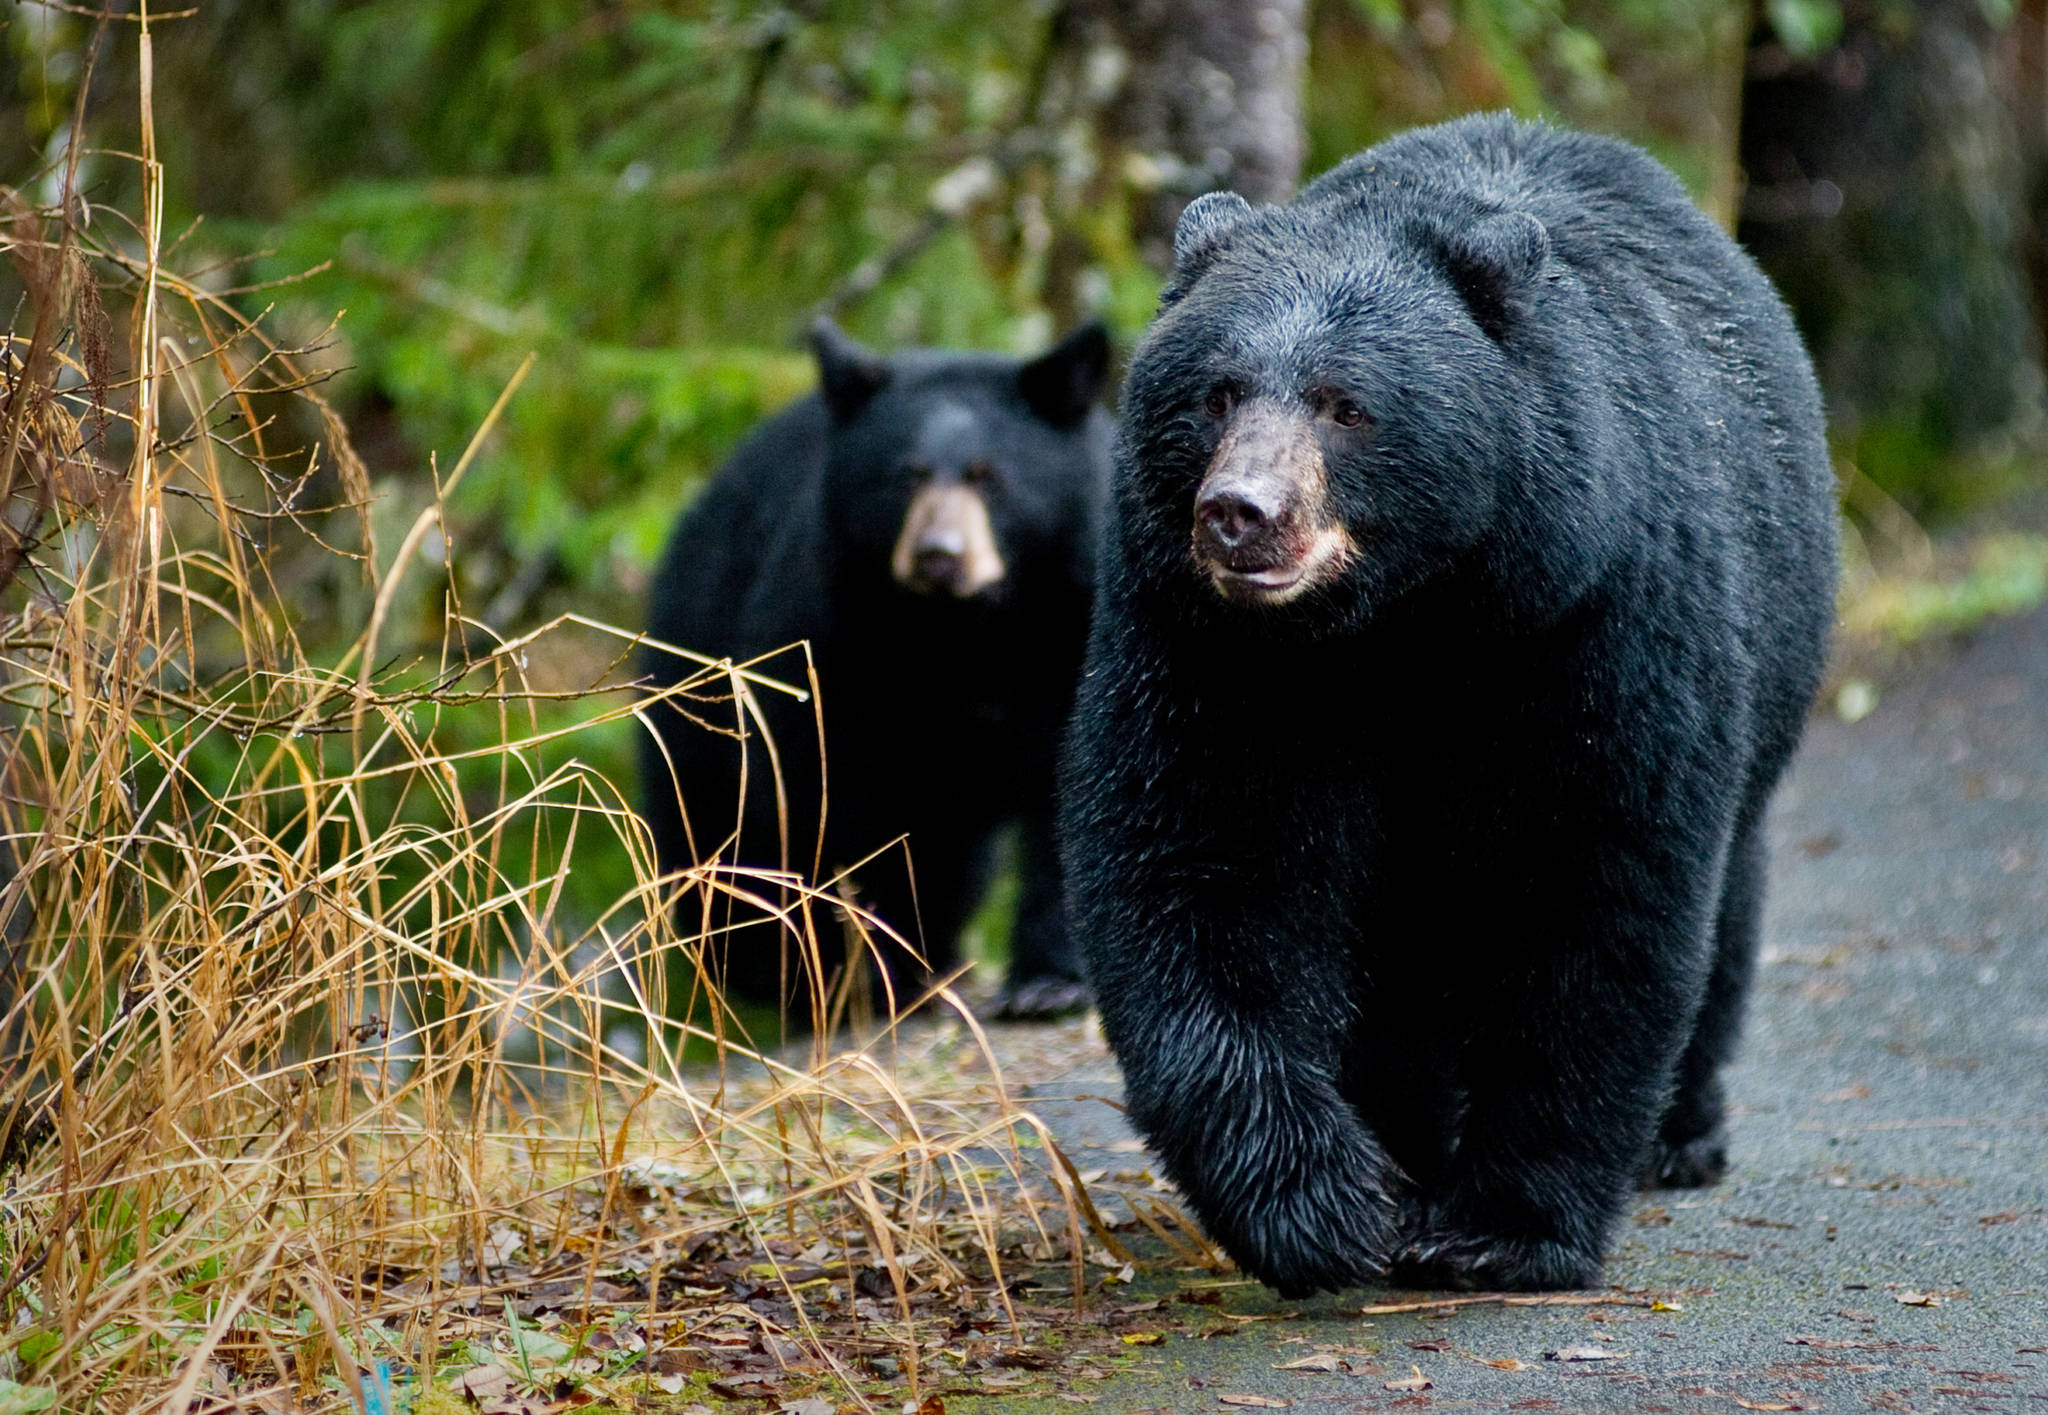 A black bear sow and her cub walk along the Trail of Time at the Mendenhall Glacier Visitor Center. A lack of visitors to the area this year may have emboldened bears to explore surrounding areas, local experts said, although it’s hard to know for sure. (Michael Penn | Juneau Empire File)